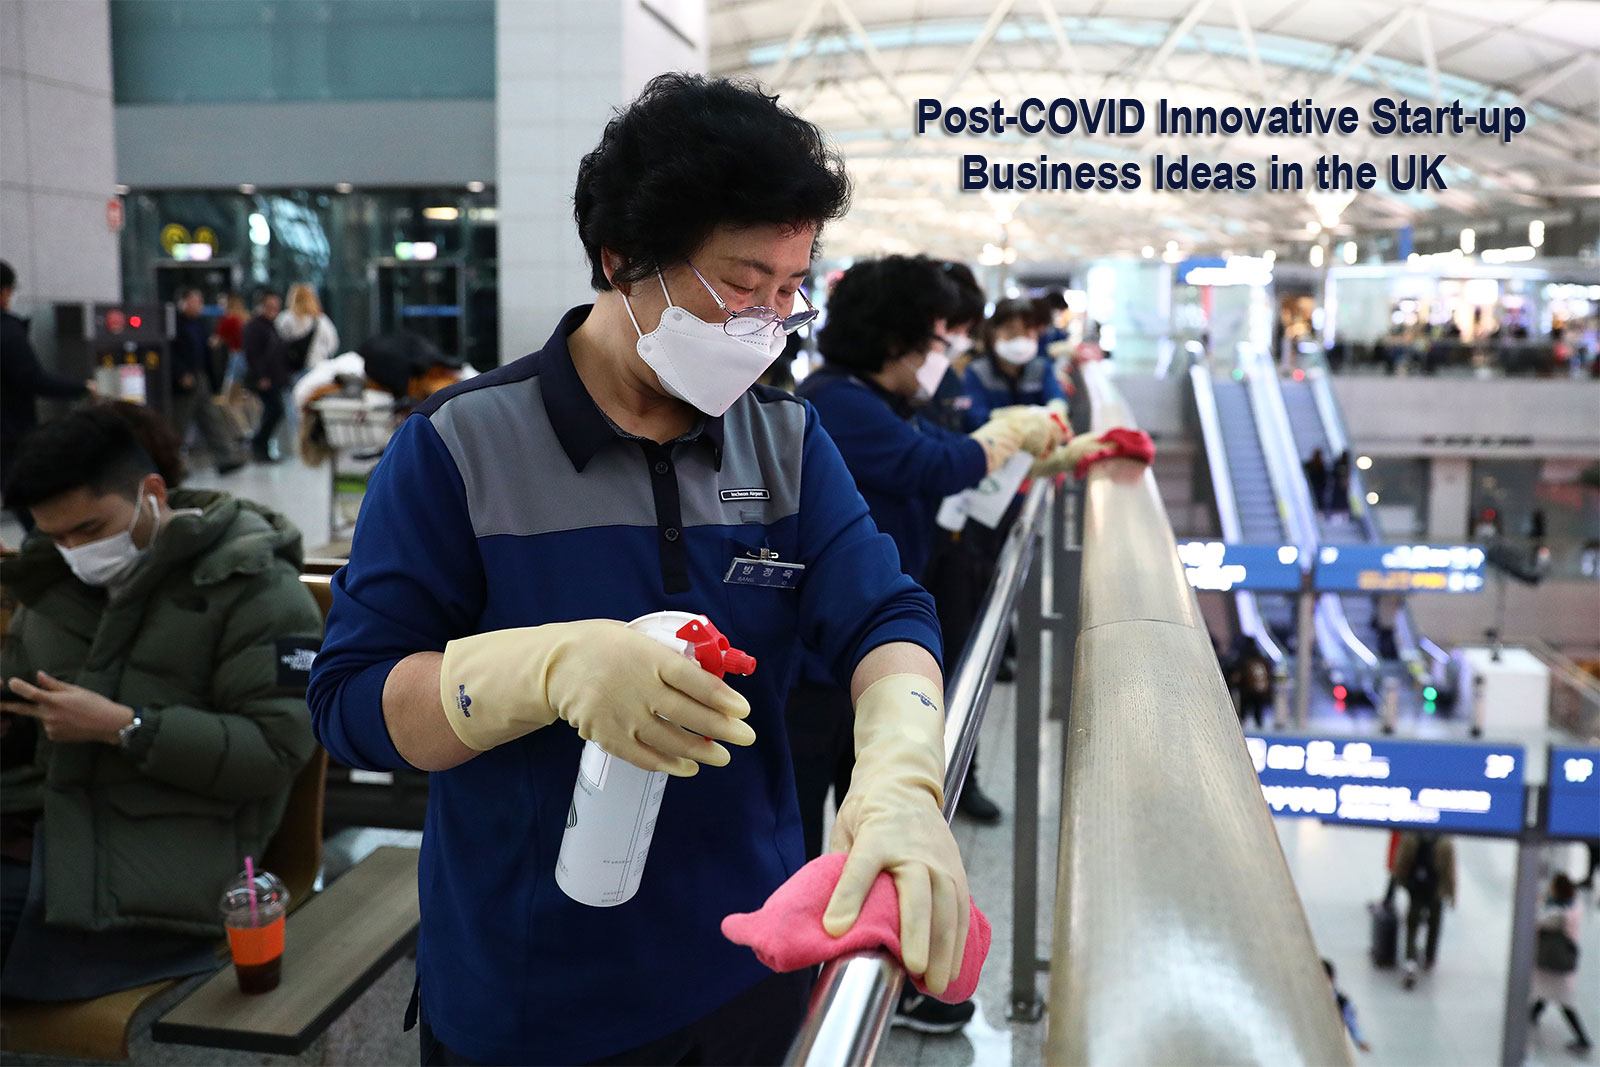 Post-COVID Innovative Start-up Business Ideas in the UK